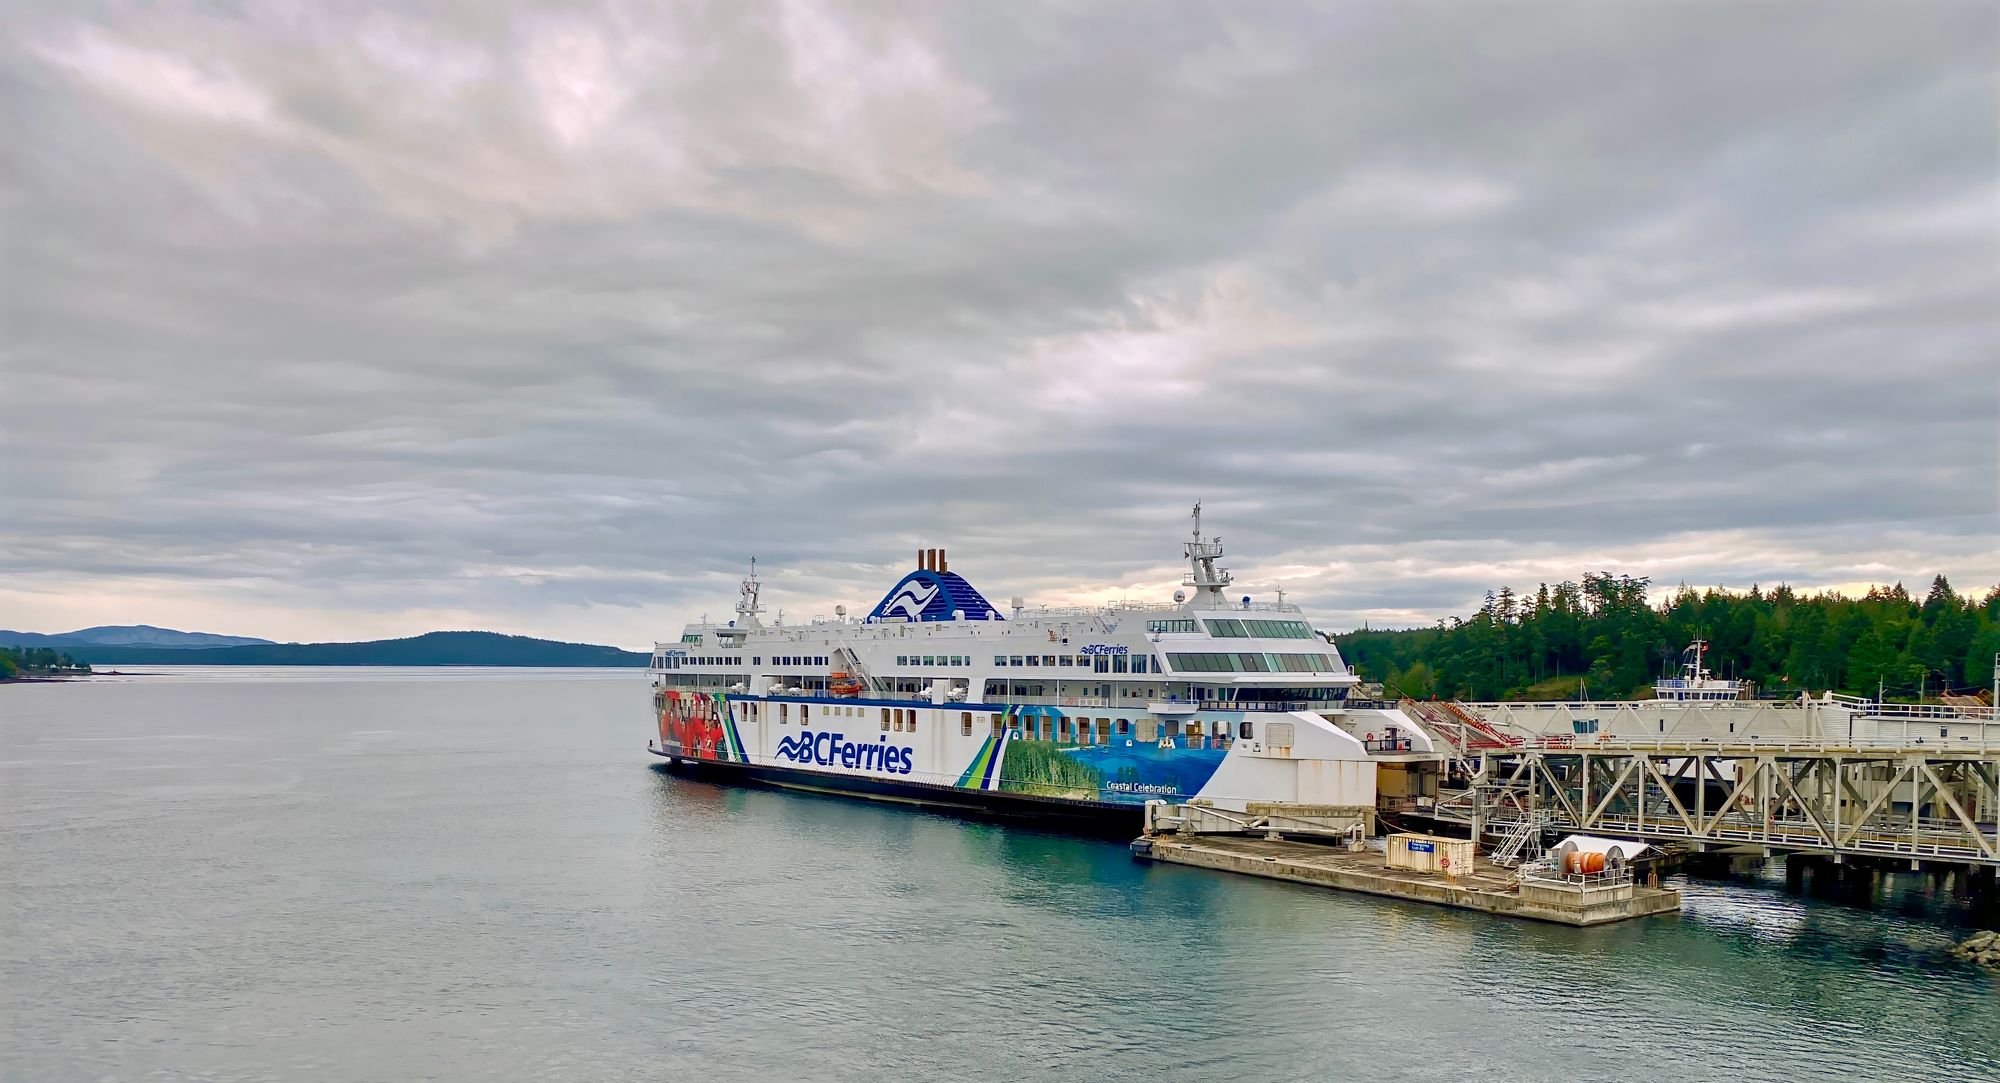 A medium-sized ferry with "BCFerries" written on the side sits at it's dock.